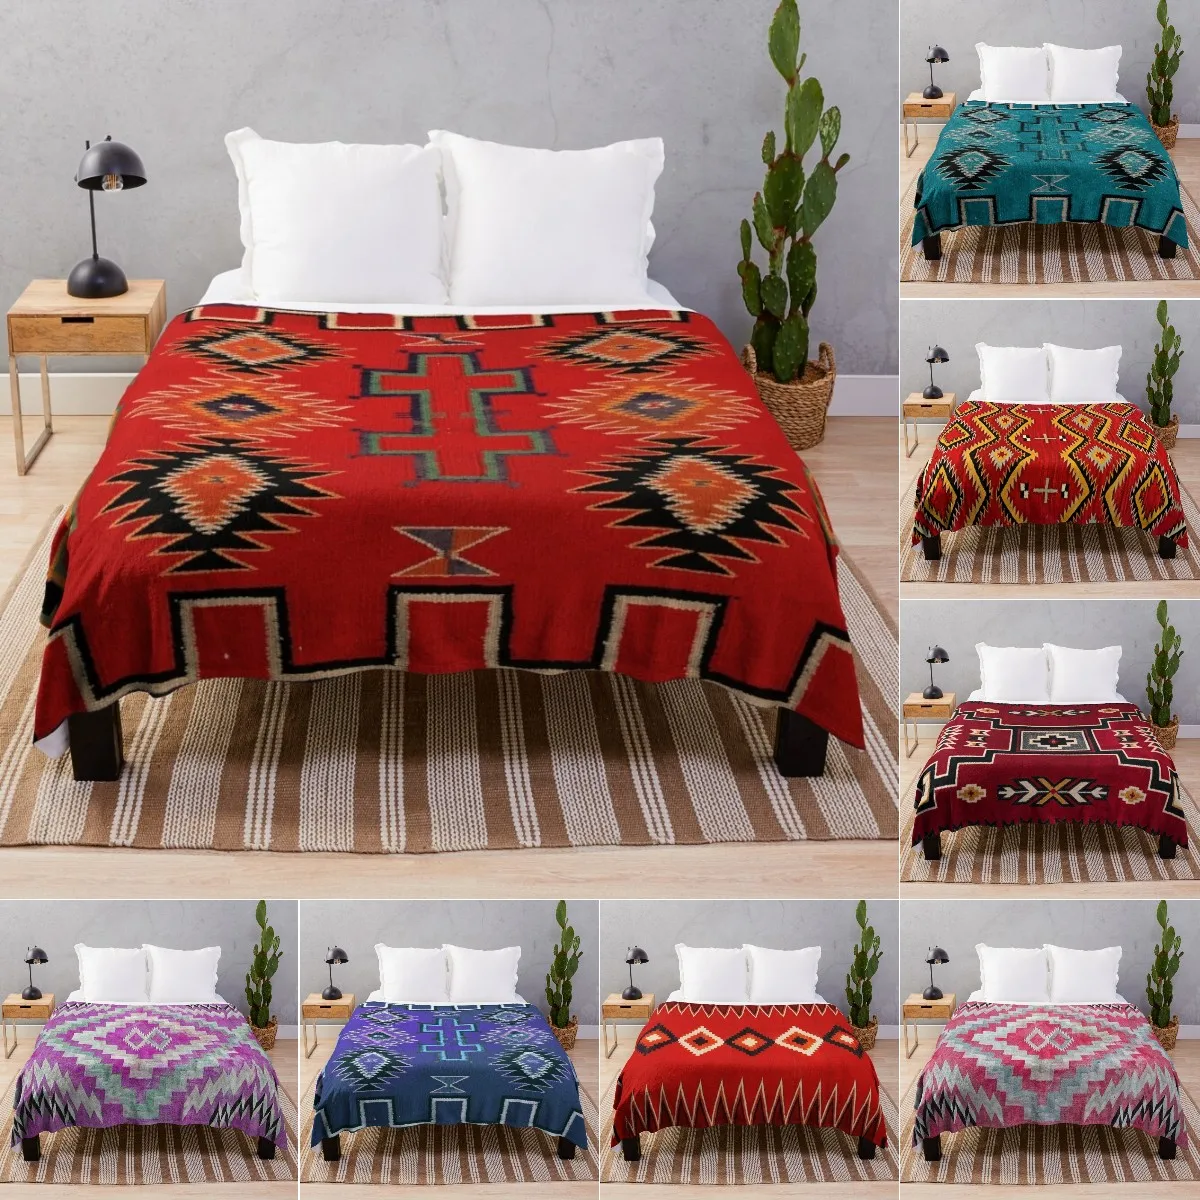 1890 Retro Blanket With Navajo Saddle, Soft Flannel Bed Blan